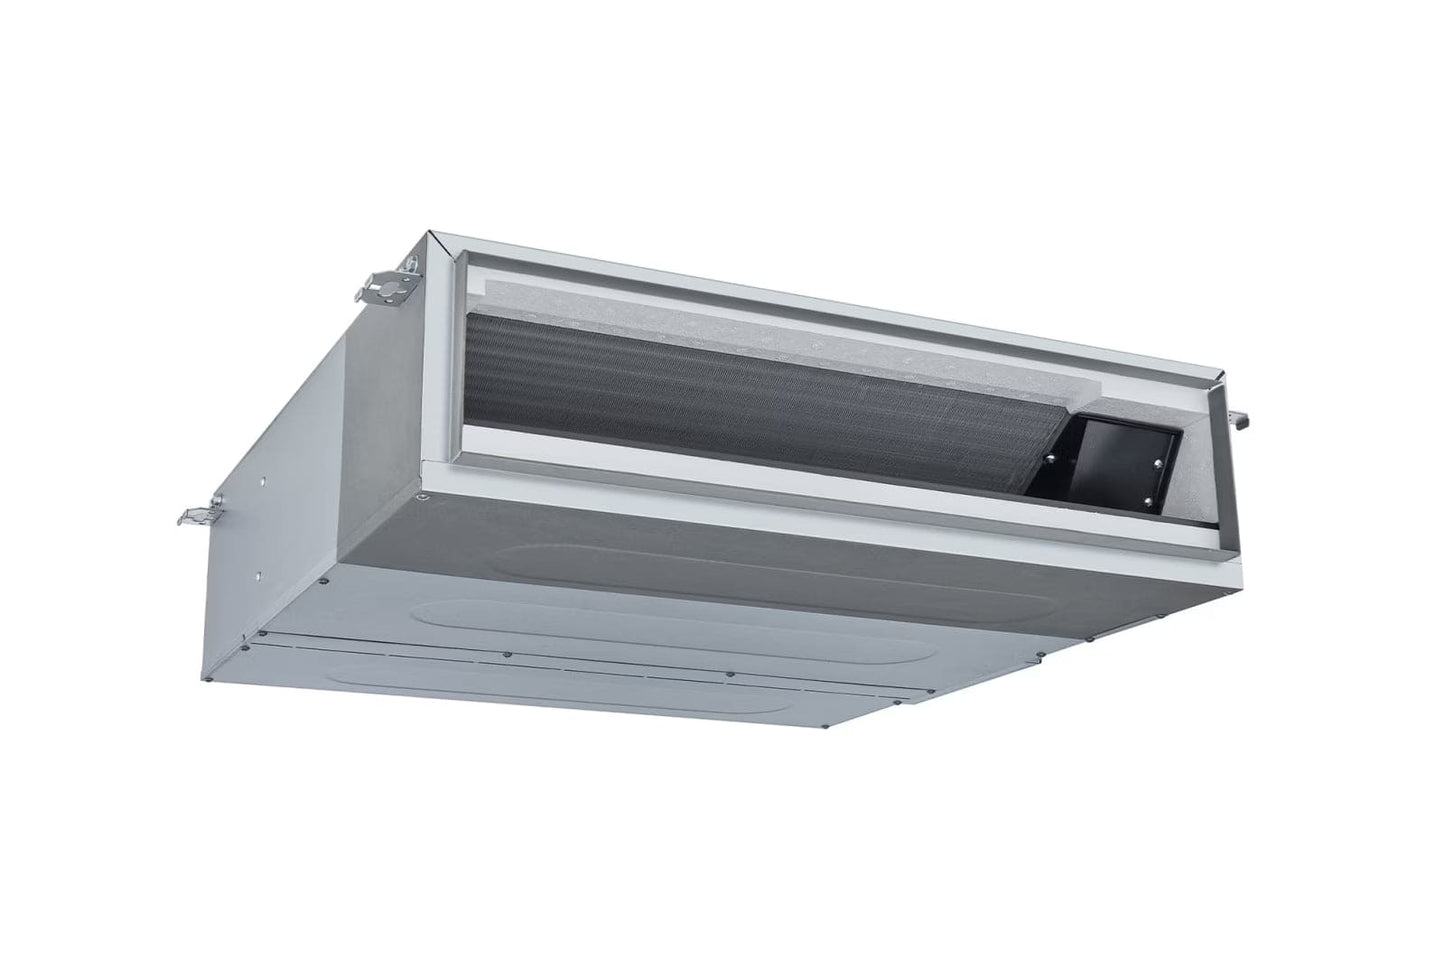 LG Ceiling Concealed Duct Unit 5.6KW with Low Static and E.S.P. Control for Multiple Rooms - ARNU18GL2G2